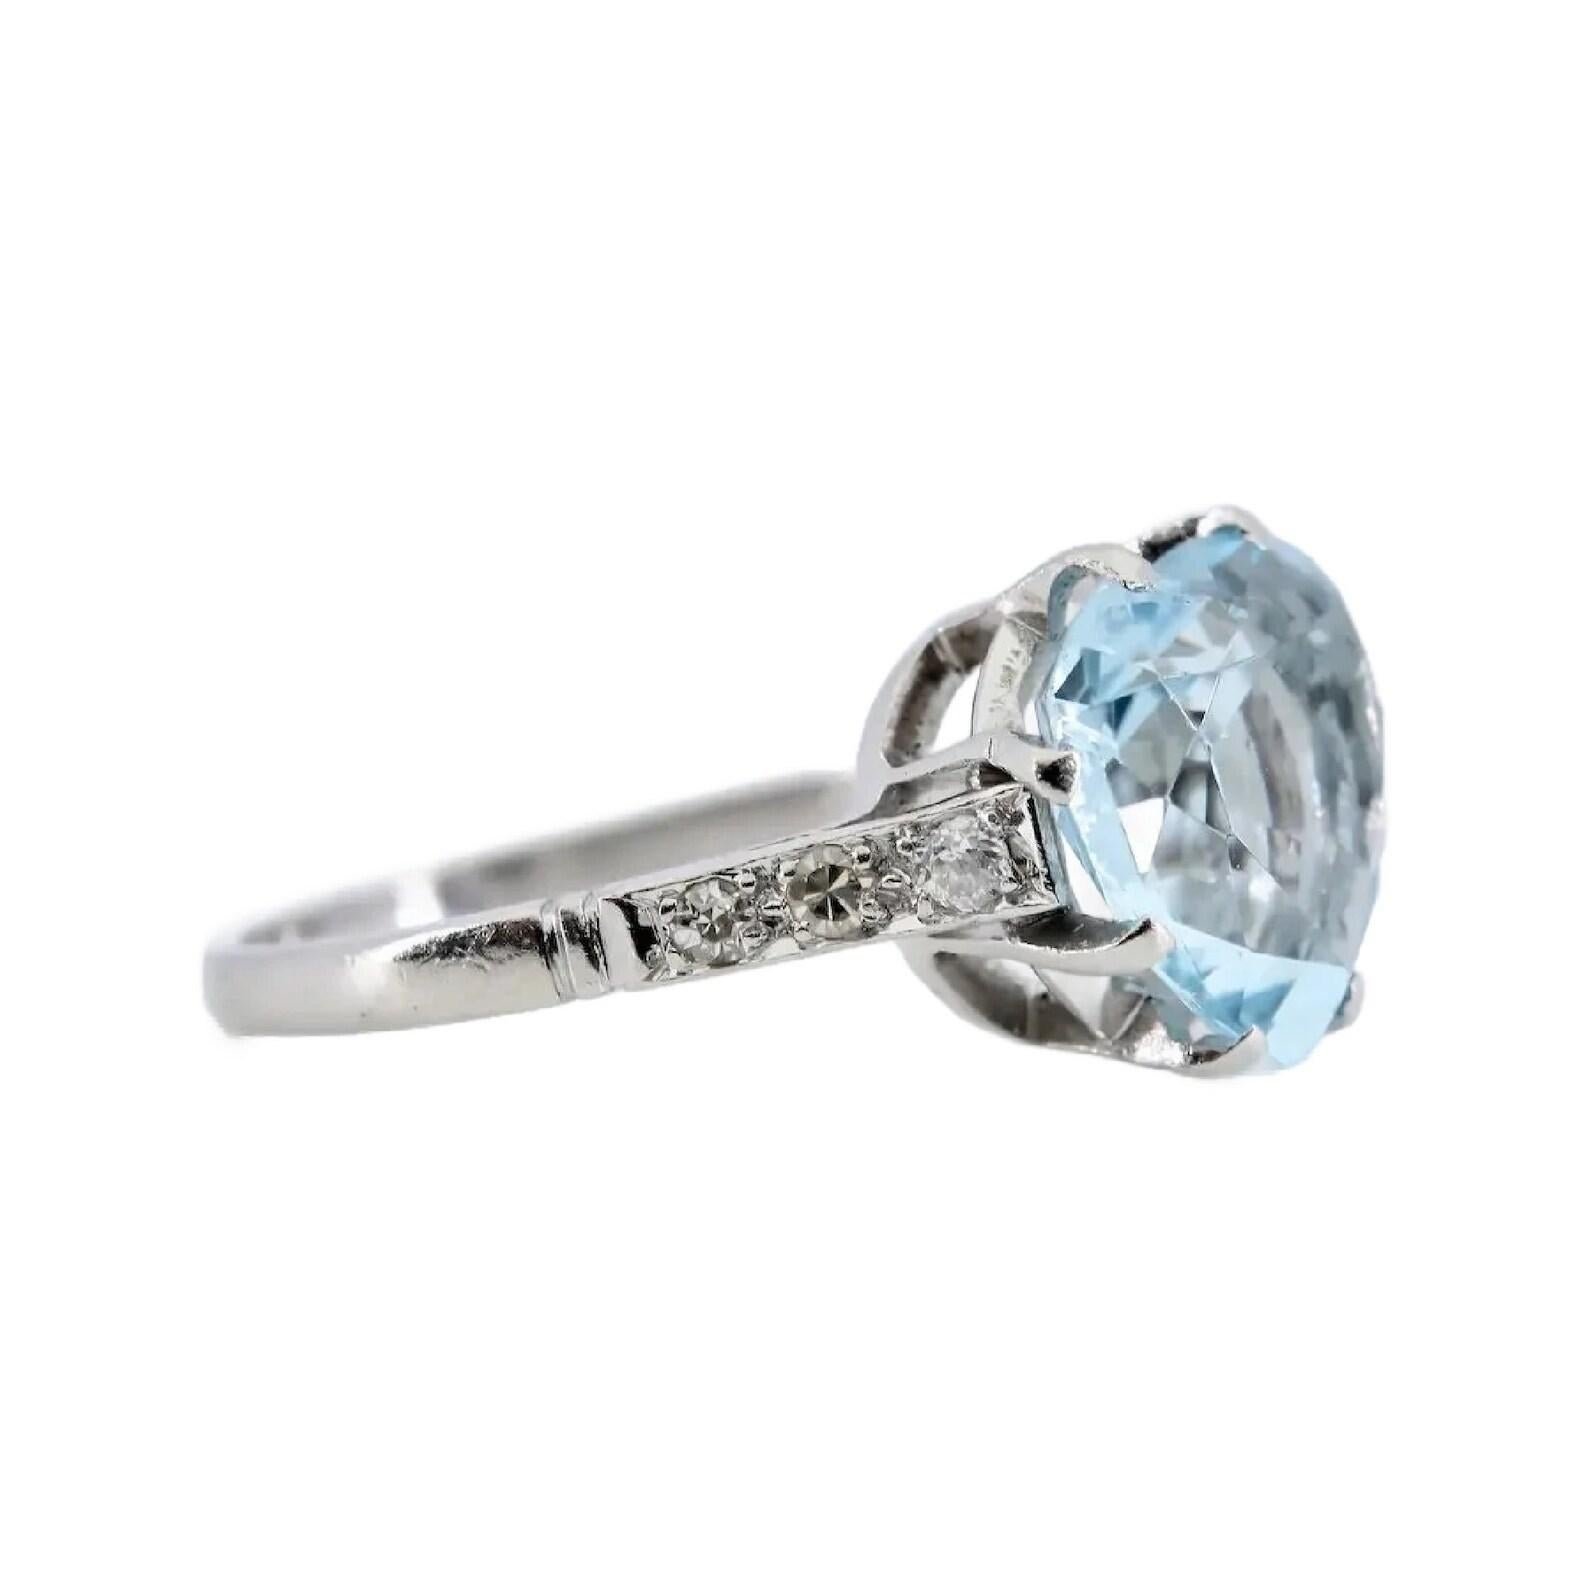 A handmade Art Deco period heart shaped aquamarine, and diamond ring in platinum.

Centered with a 3.10 Carat blue aquamarine set in a platinum basket mount.

Accented by six pave set old European cut diamonds of H color, SI1 clarity.

Tested as